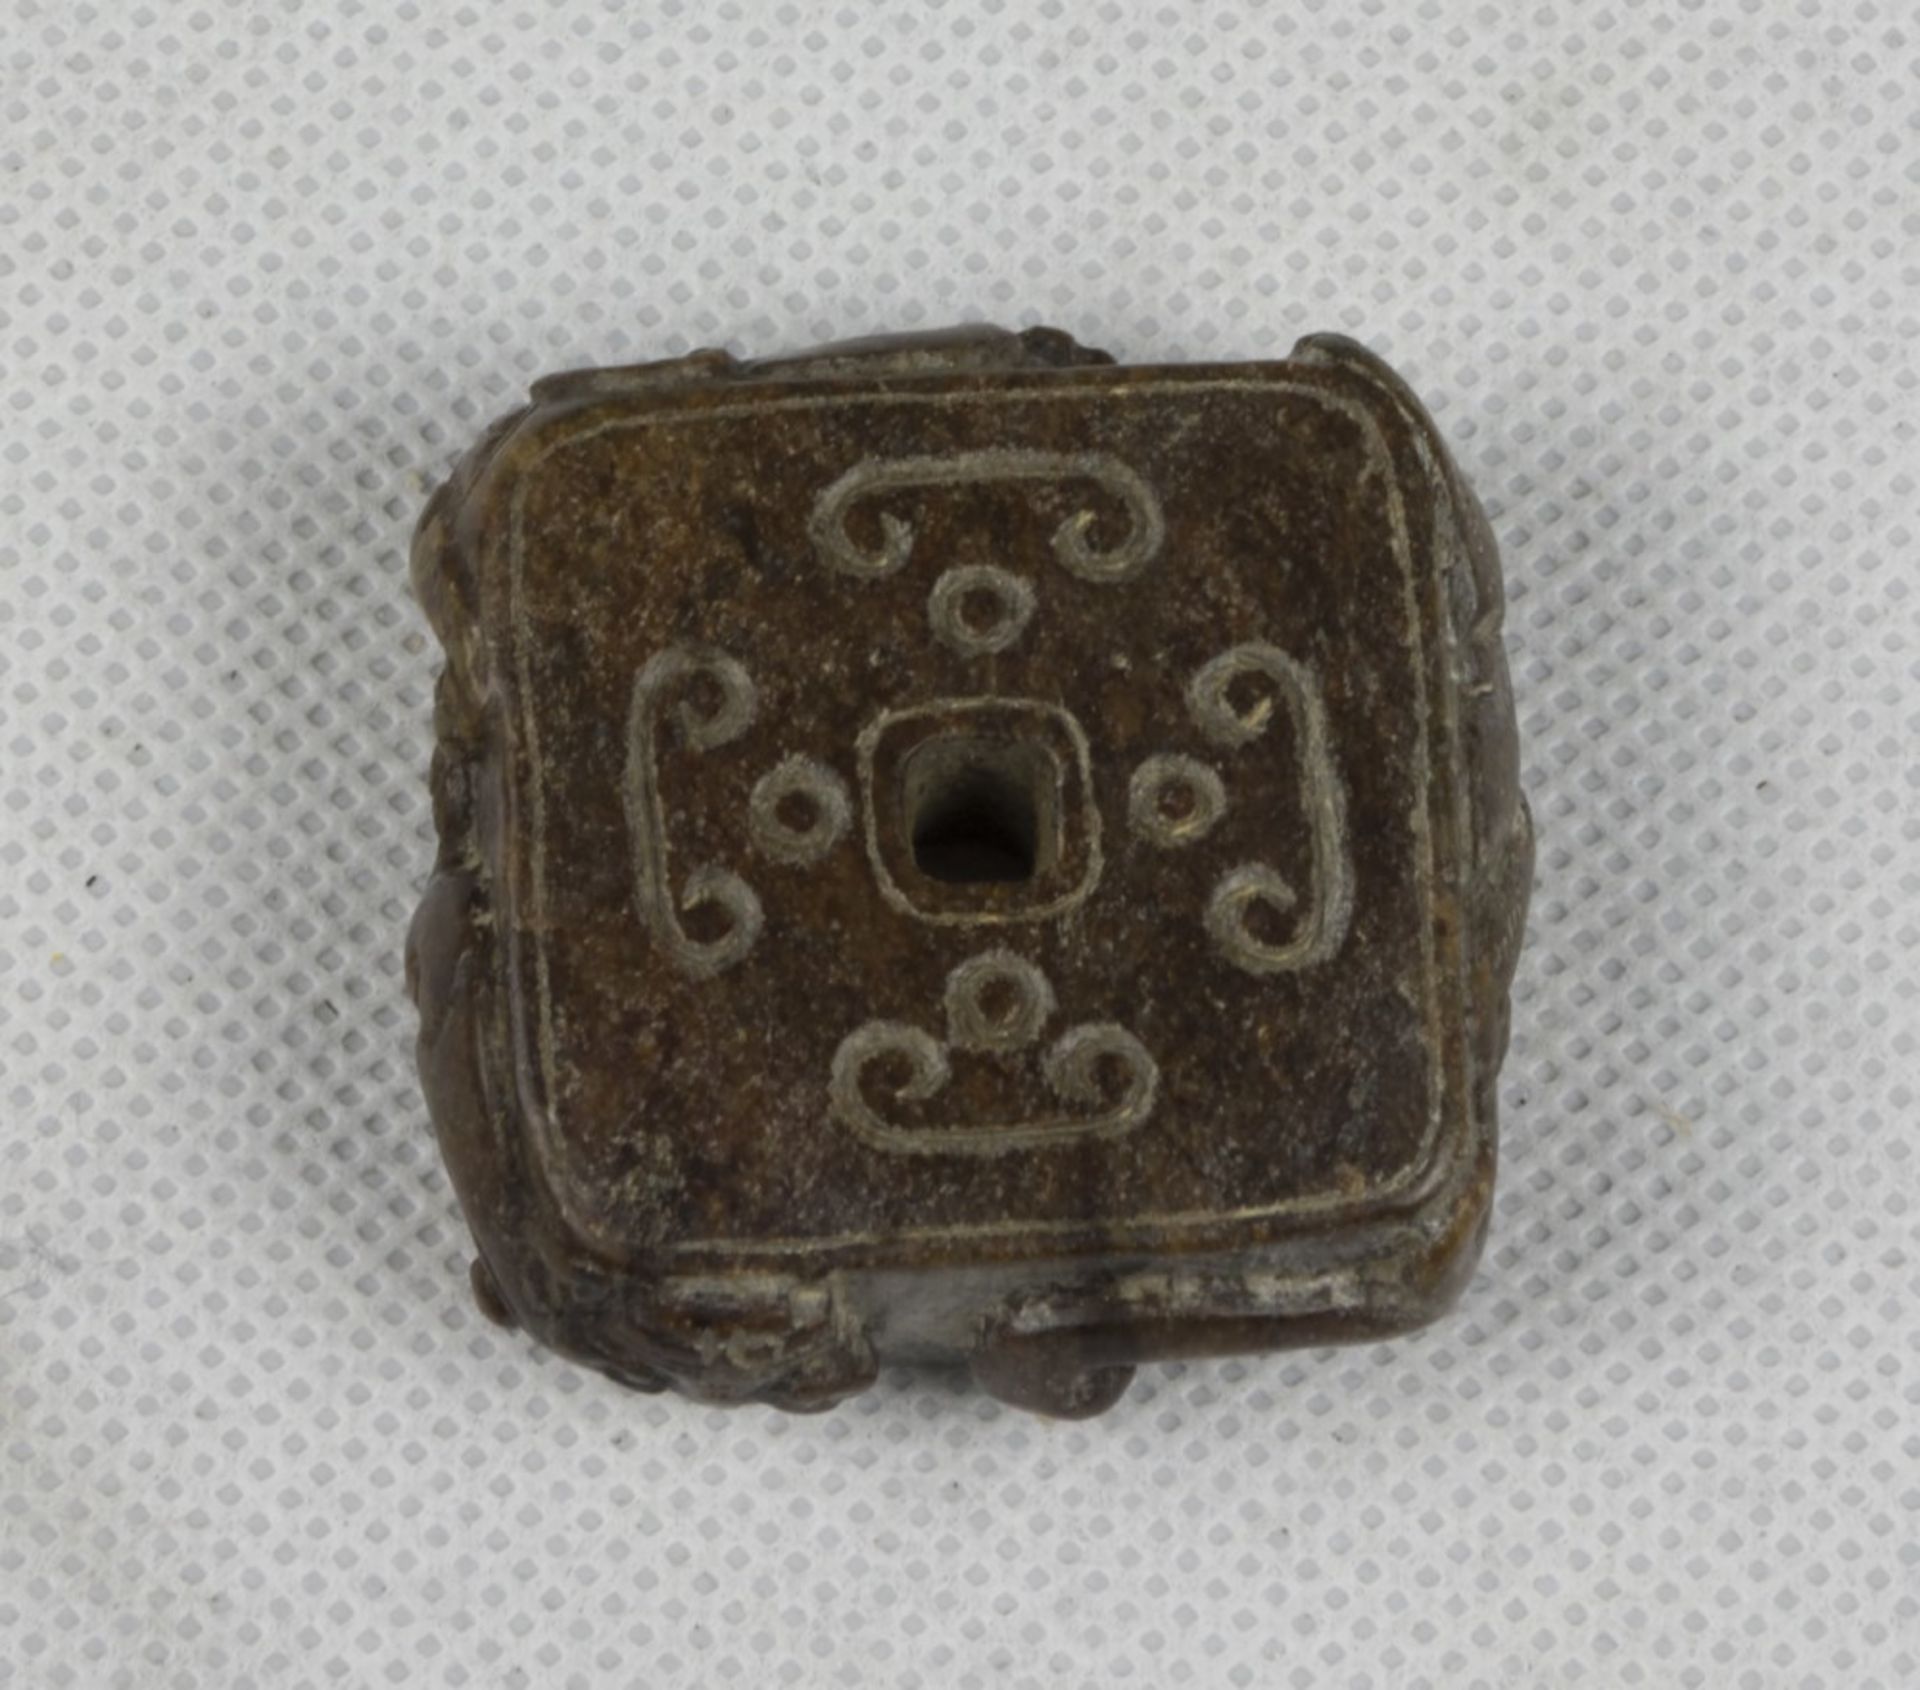 A Chinese serpentine pendant. 20th century. Measures cm. 3 x 3. PENDENTE IN SERPENTINO, CINA XX